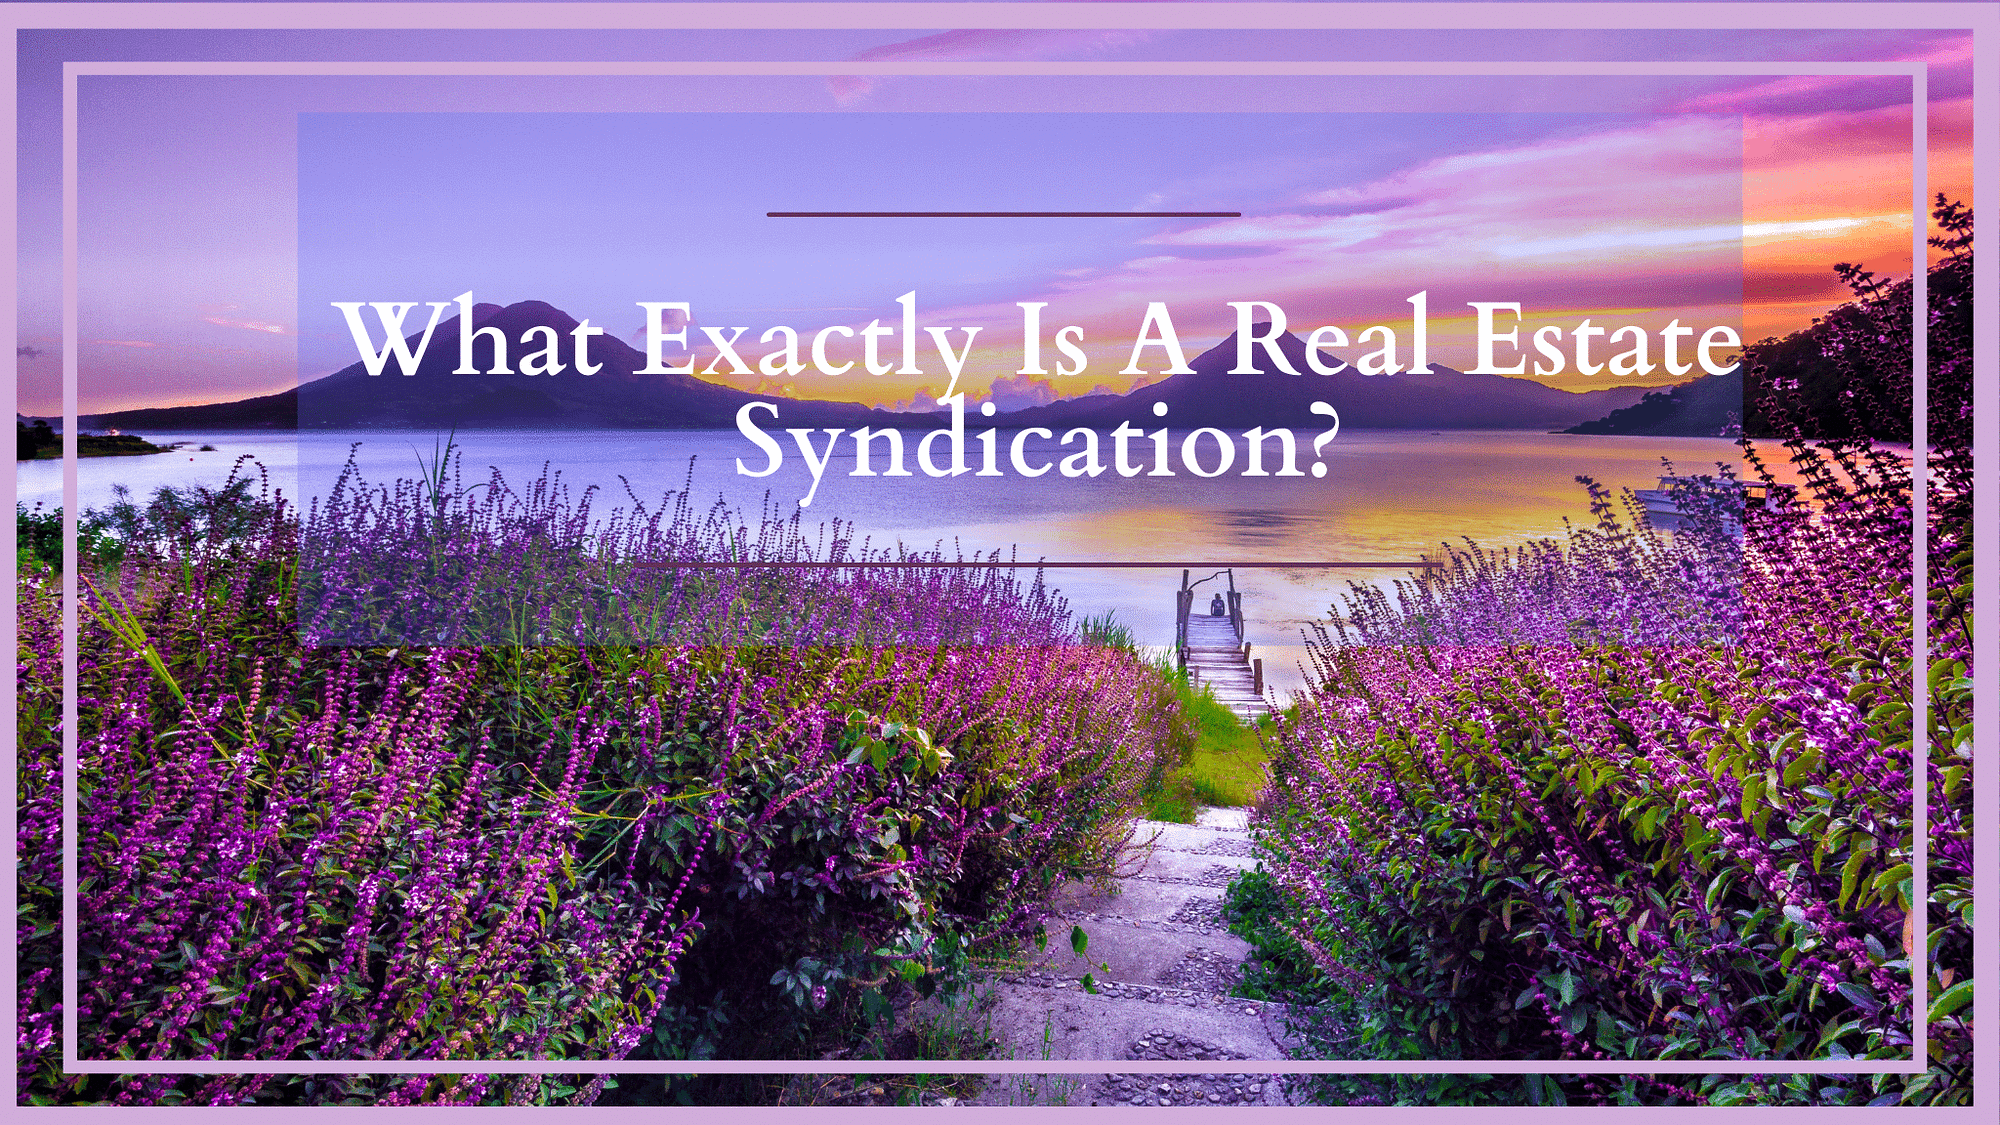 What exactly is a syndication?